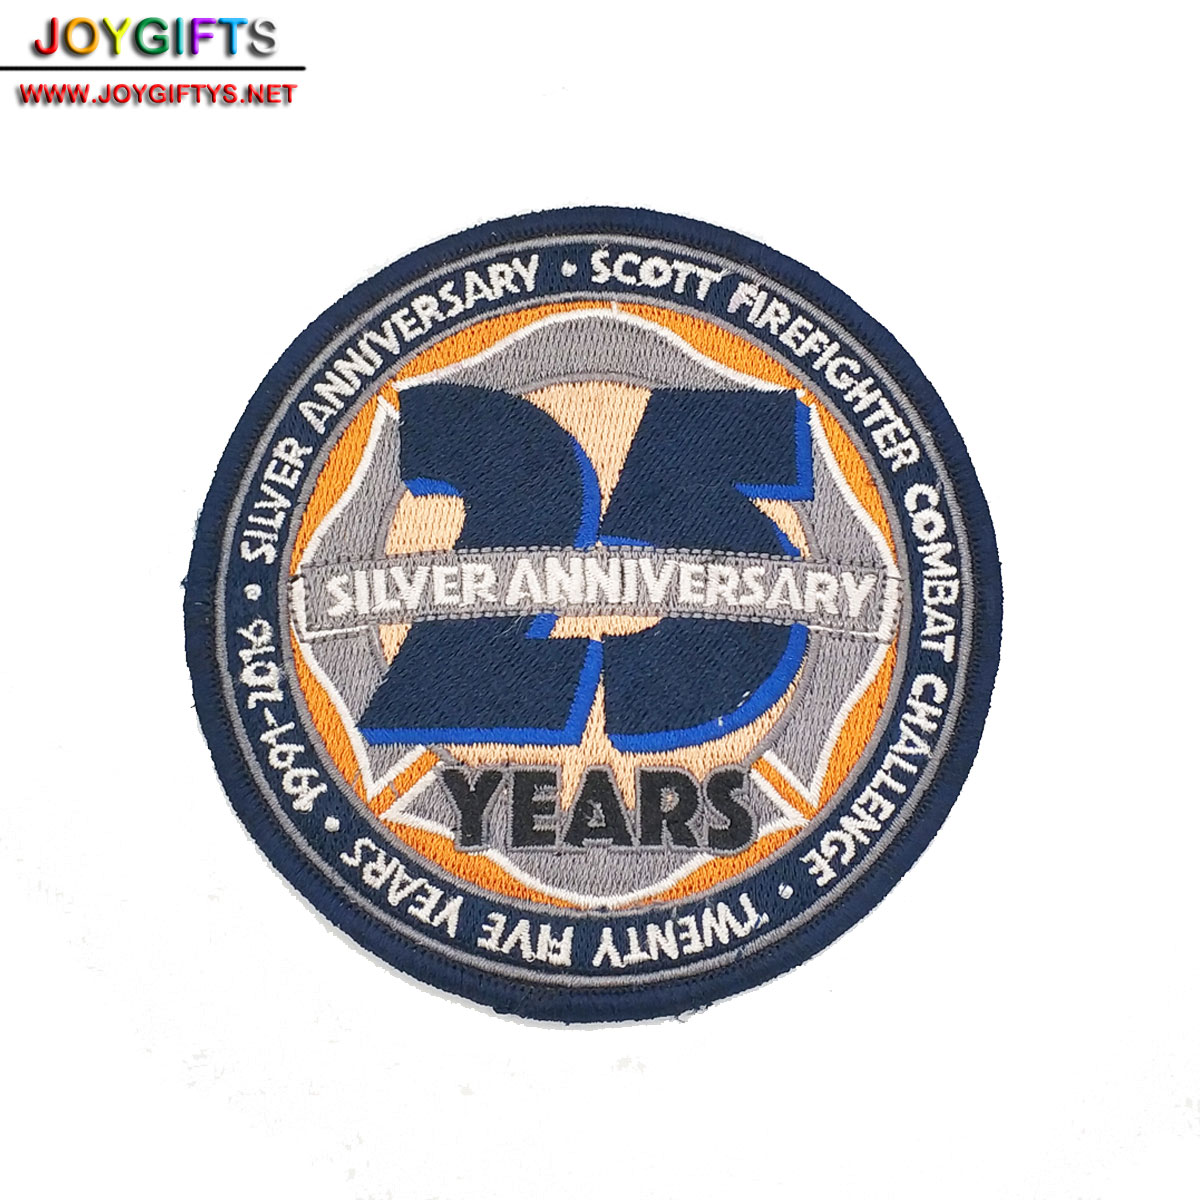 Silver anniversary patch